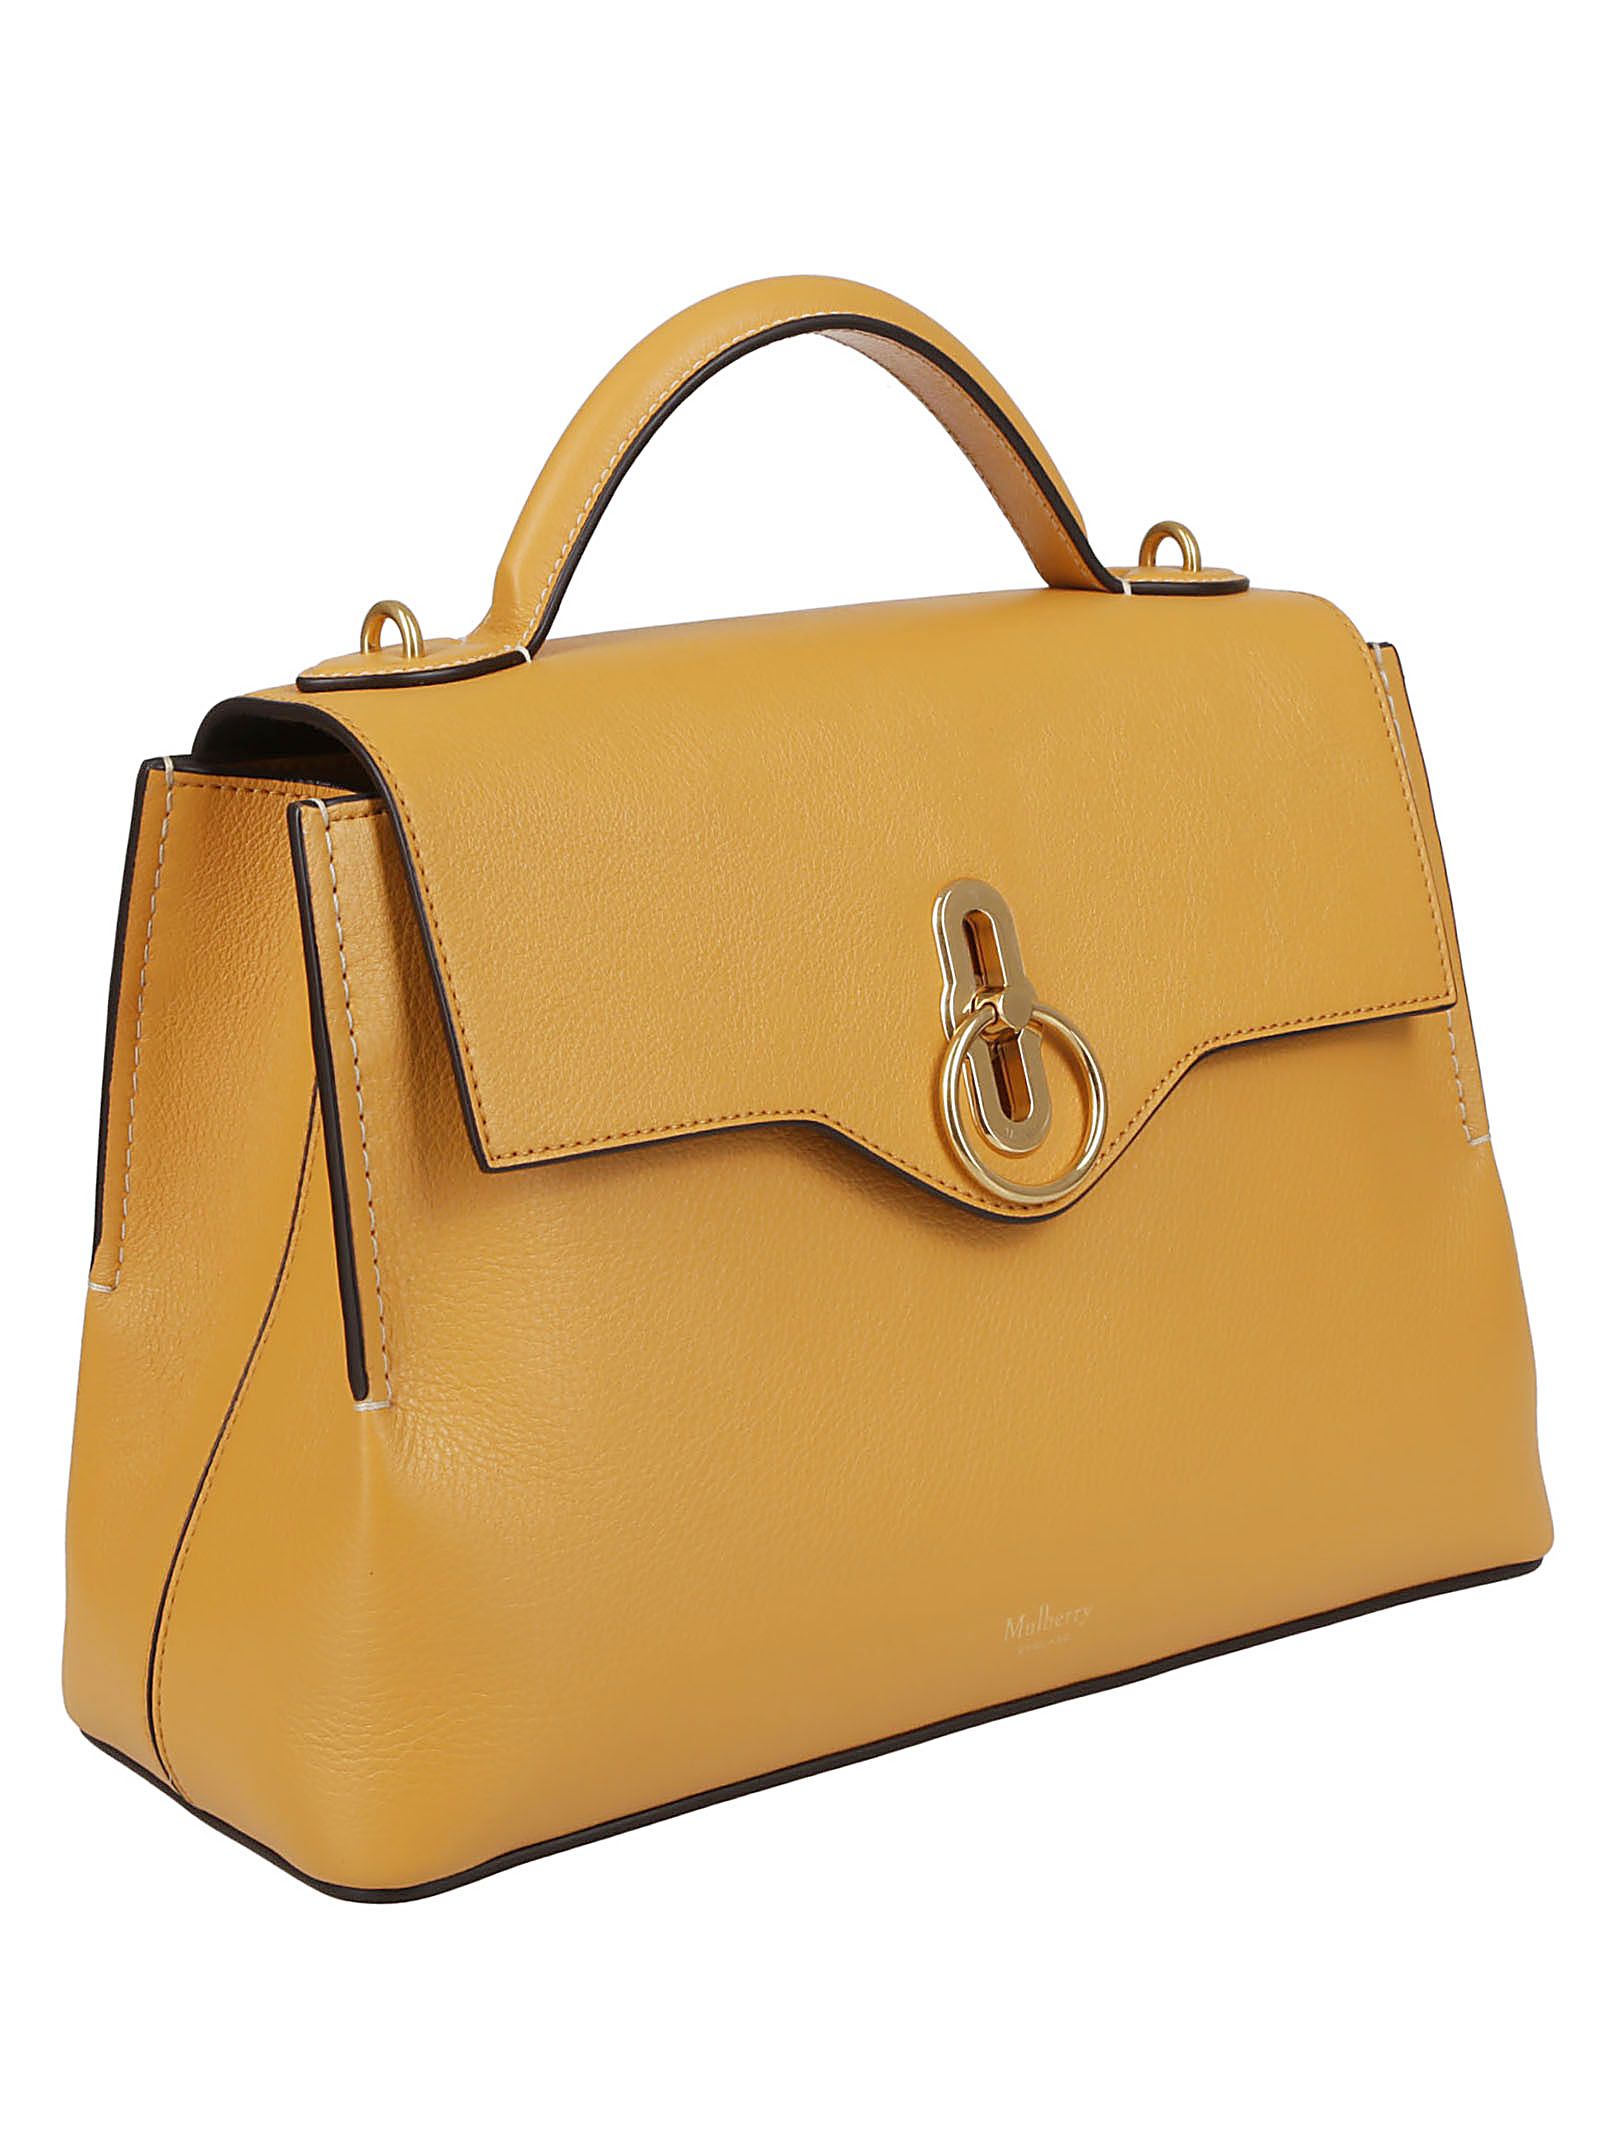 Mulberry Mulberry Seaton Small Shoulder Bag - Yellow - 10888320 | italist